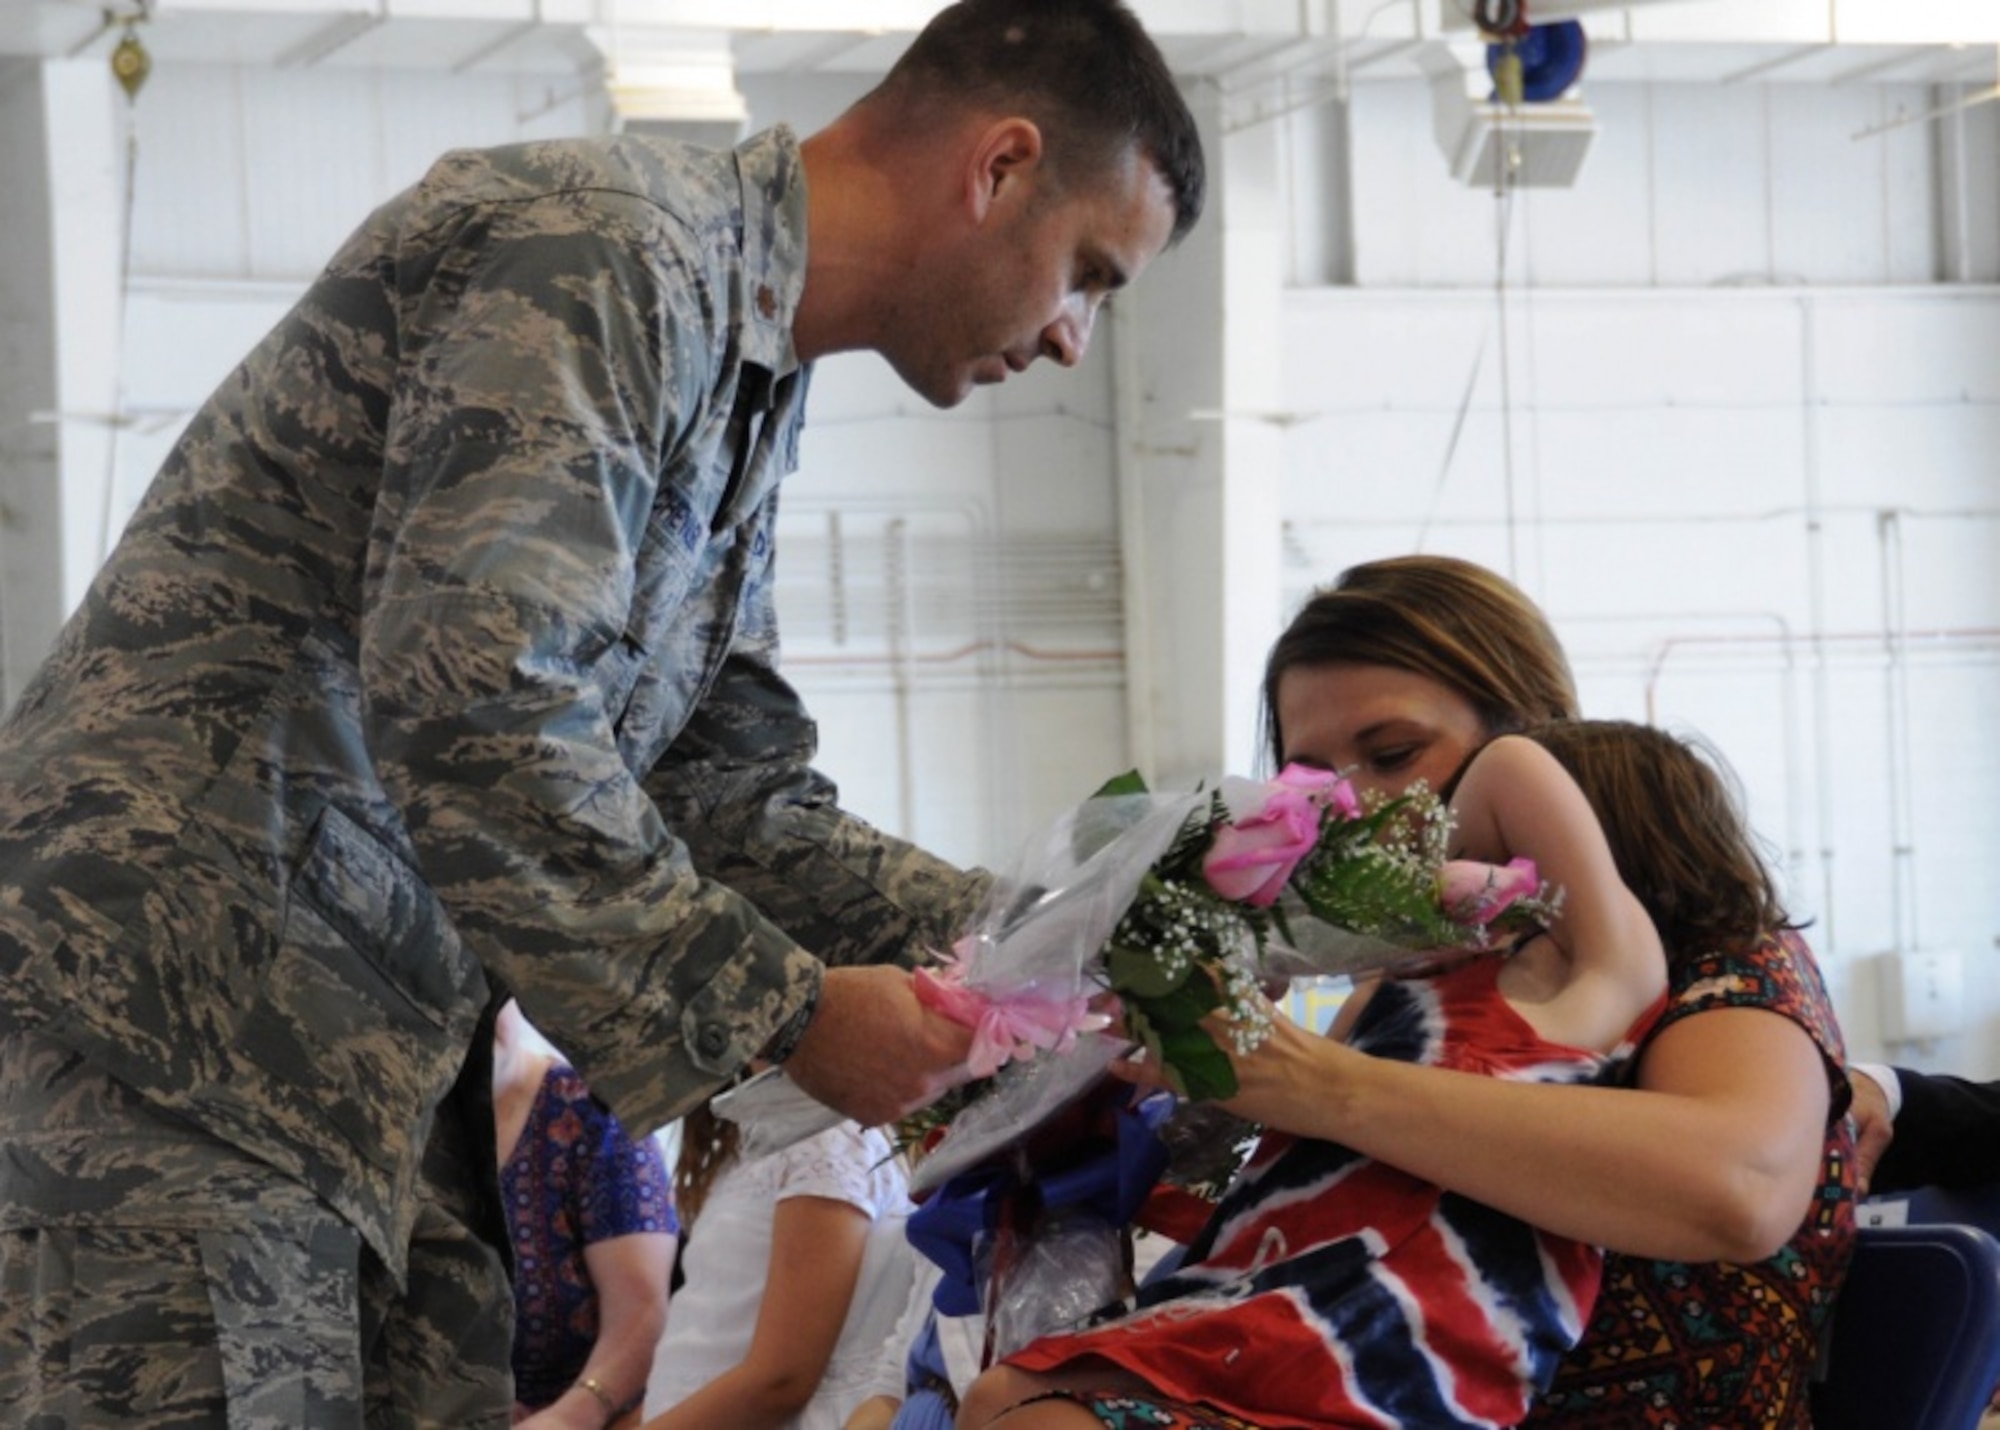 Maj. James Chevalier, the new 442d Aircraft Maintenance Squadron commander, presents flowers to his family members during his assumption of command ceremony at Whiteman Air Force Base, Mo., July 8, 2017. Chevalier graduated from the University of Central Missouri with a Masters of Aviation Safety in 2004 and two years later was selected to commission under the Deserving Airman Program. (U.S. Air Force photo by Senior Airman Missy Sterling)